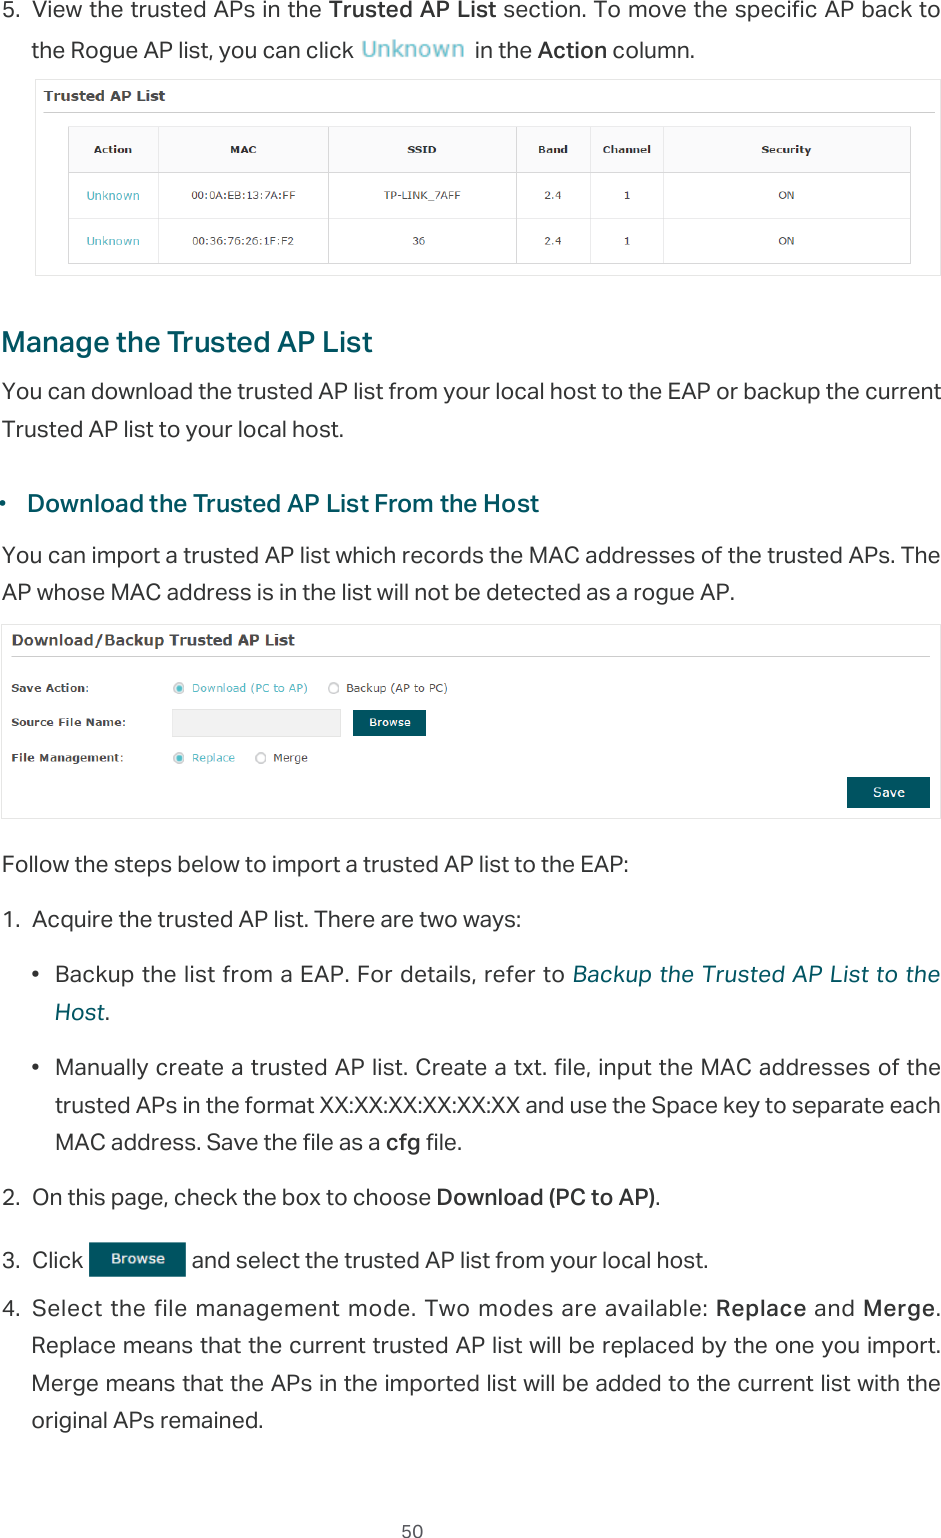  505. View the trusted APs in the Trusted AP List section. To move the specific AP back to the Rogue AP list, you can click   in the Action column.Manage the Trusted AP ListYou can download the trusted AP list from your local host to the EAP or backup the current Trusted AP list to your local host. ·Download the Trusted AP List From the HostYou can import a trusted AP list which records the MAC addresses of the trusted APs. The AP whose MAC address is in the list will not be detected as a rogue AP.Follow the steps below to import a trusted AP list to the EAP:1. Acquire the trusted AP list. There are two ways:•  Backup the list from a EAP. For details, refer to Backup the Trusted AP List to the Host.•  Manually create a trusted AP list. Create a txt. file, input the MAC addresses of the trusted APs in the format XX:XX:XX:XX:XX:XX and use the Space key to separate each MAC address. Save the file as a cfg file.2. On this page, check the box to choose Download (PC to AP).3. Click   and select the trusted AP list from your local host.4. Select the file management mode. Two modes are available: Replace and Merge. Replace means that the current trusted AP list will be replaced by the one you import. Merge means that the APs in the imported list will be added to the current list with the original APs remained.